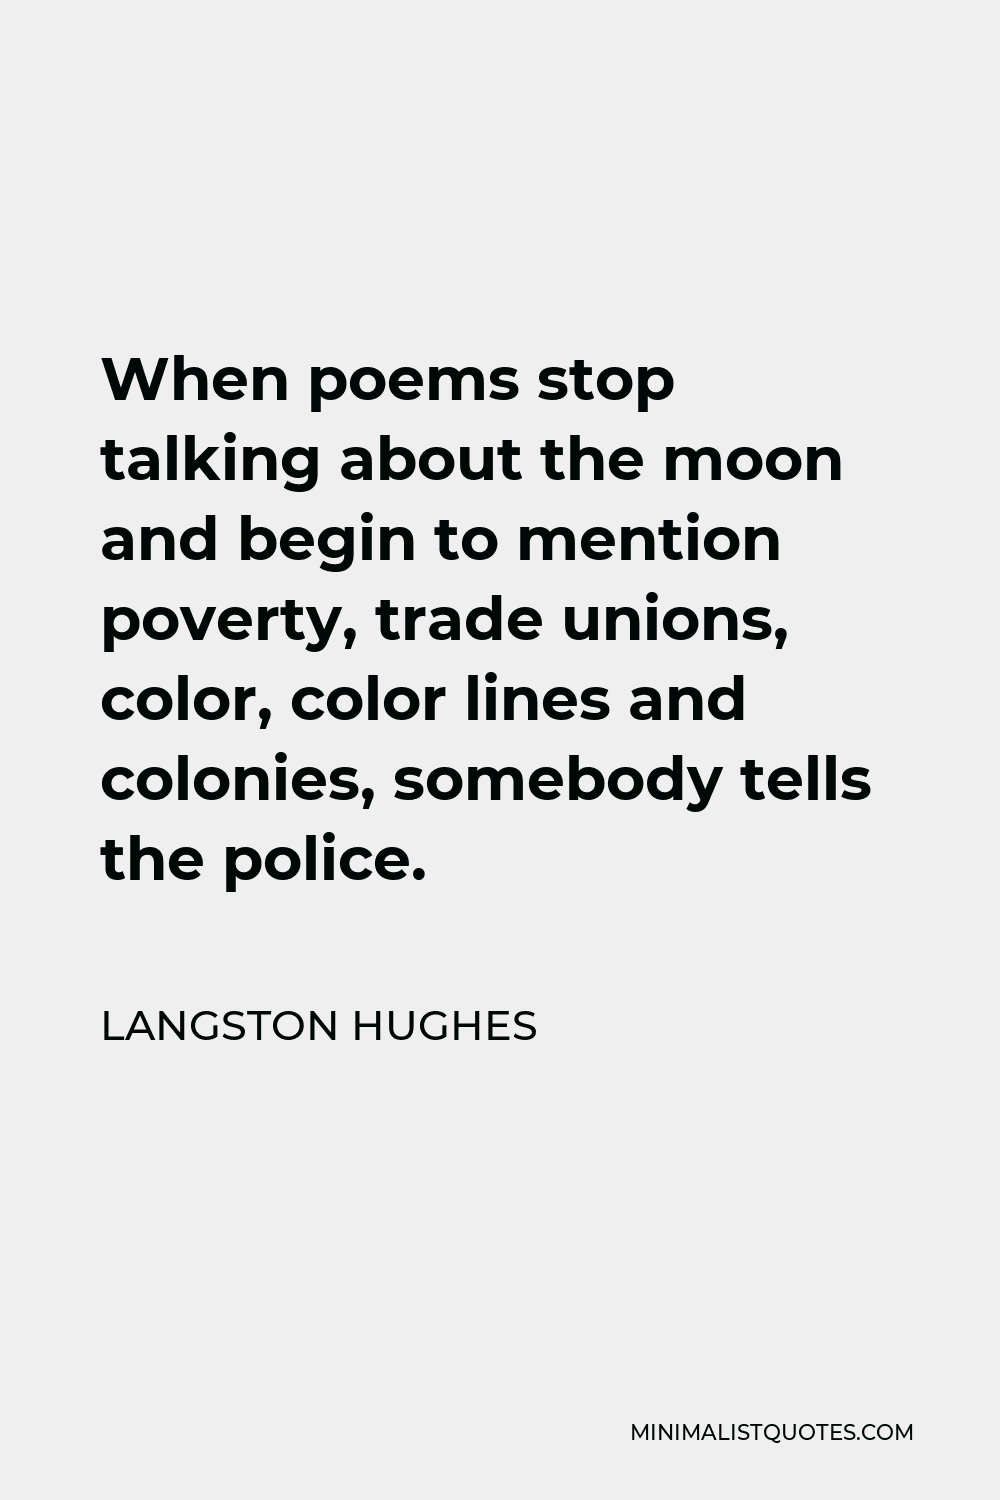 Langston Hughes Quote - When poems stop talking about the moon and begin to mention poverty, trade unions, color, color lines and colonies, somebody tells the police.